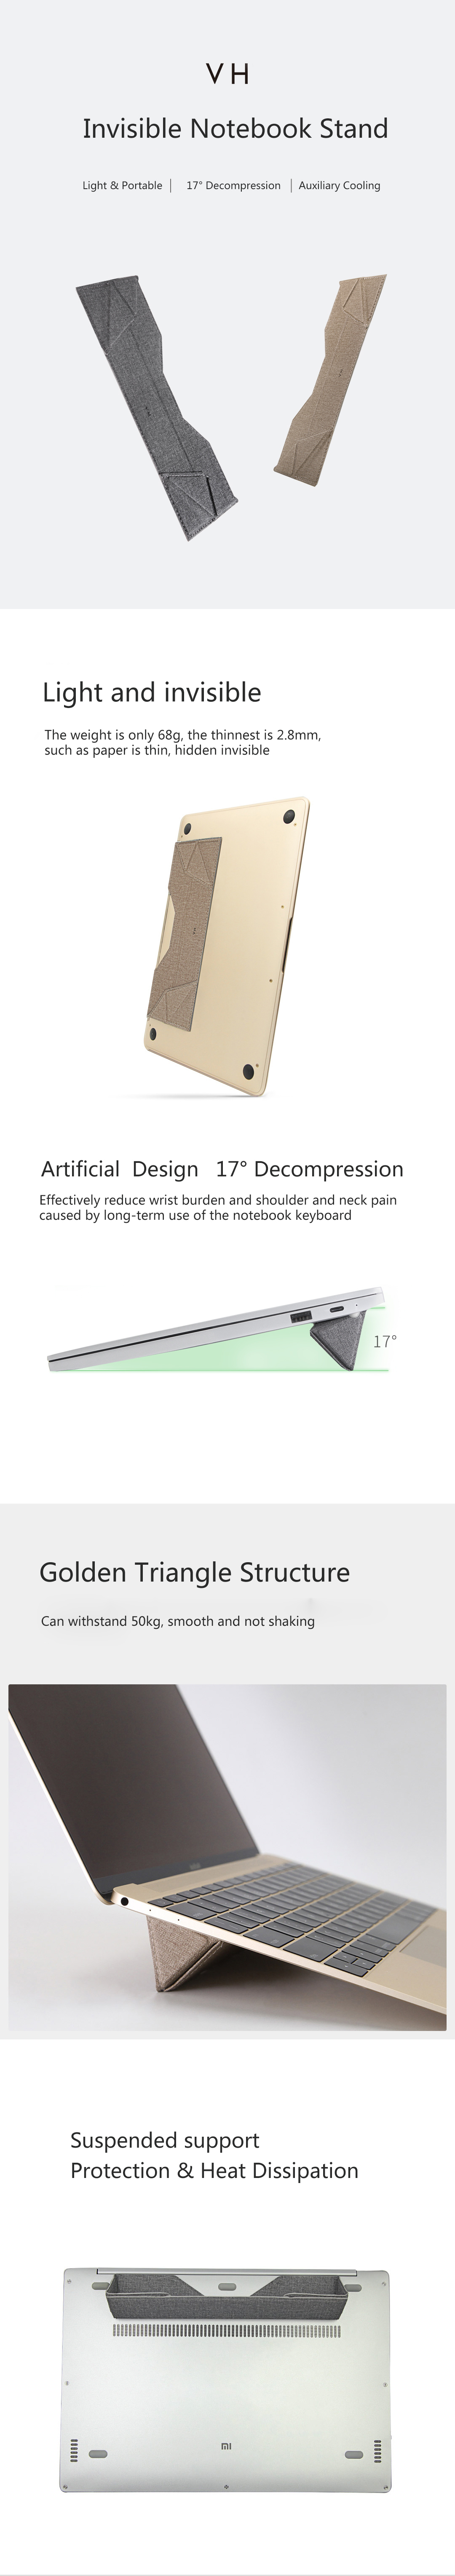 XIAOMI VH "HE" invisible notebook Laptop Stand 6